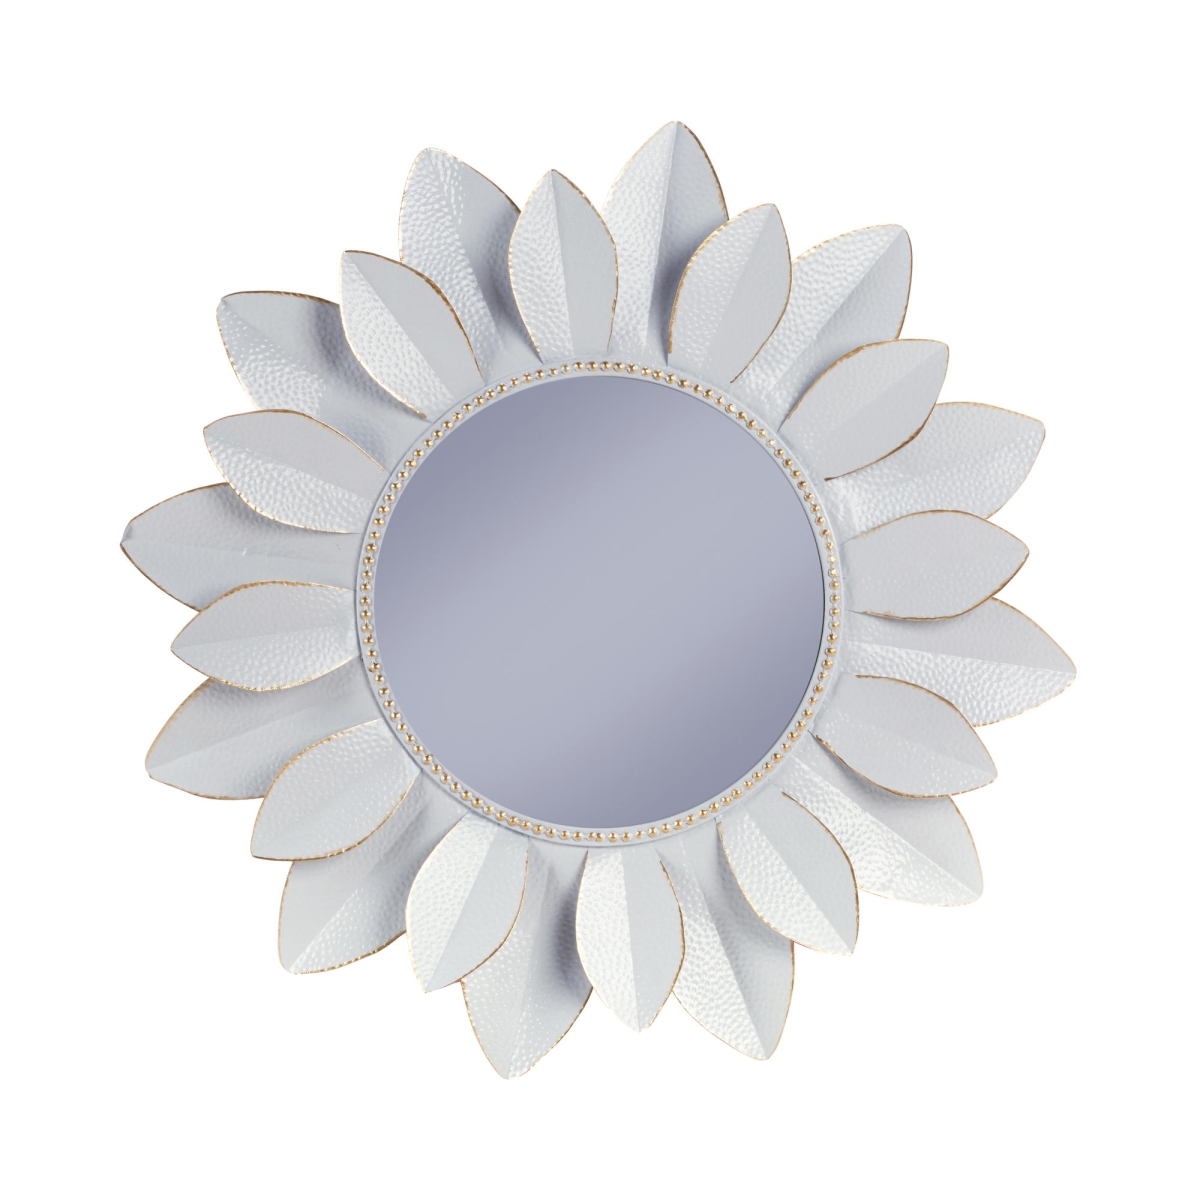 Picture of Tripar 20562 Metal Starburst Wall Accent Mirror, White